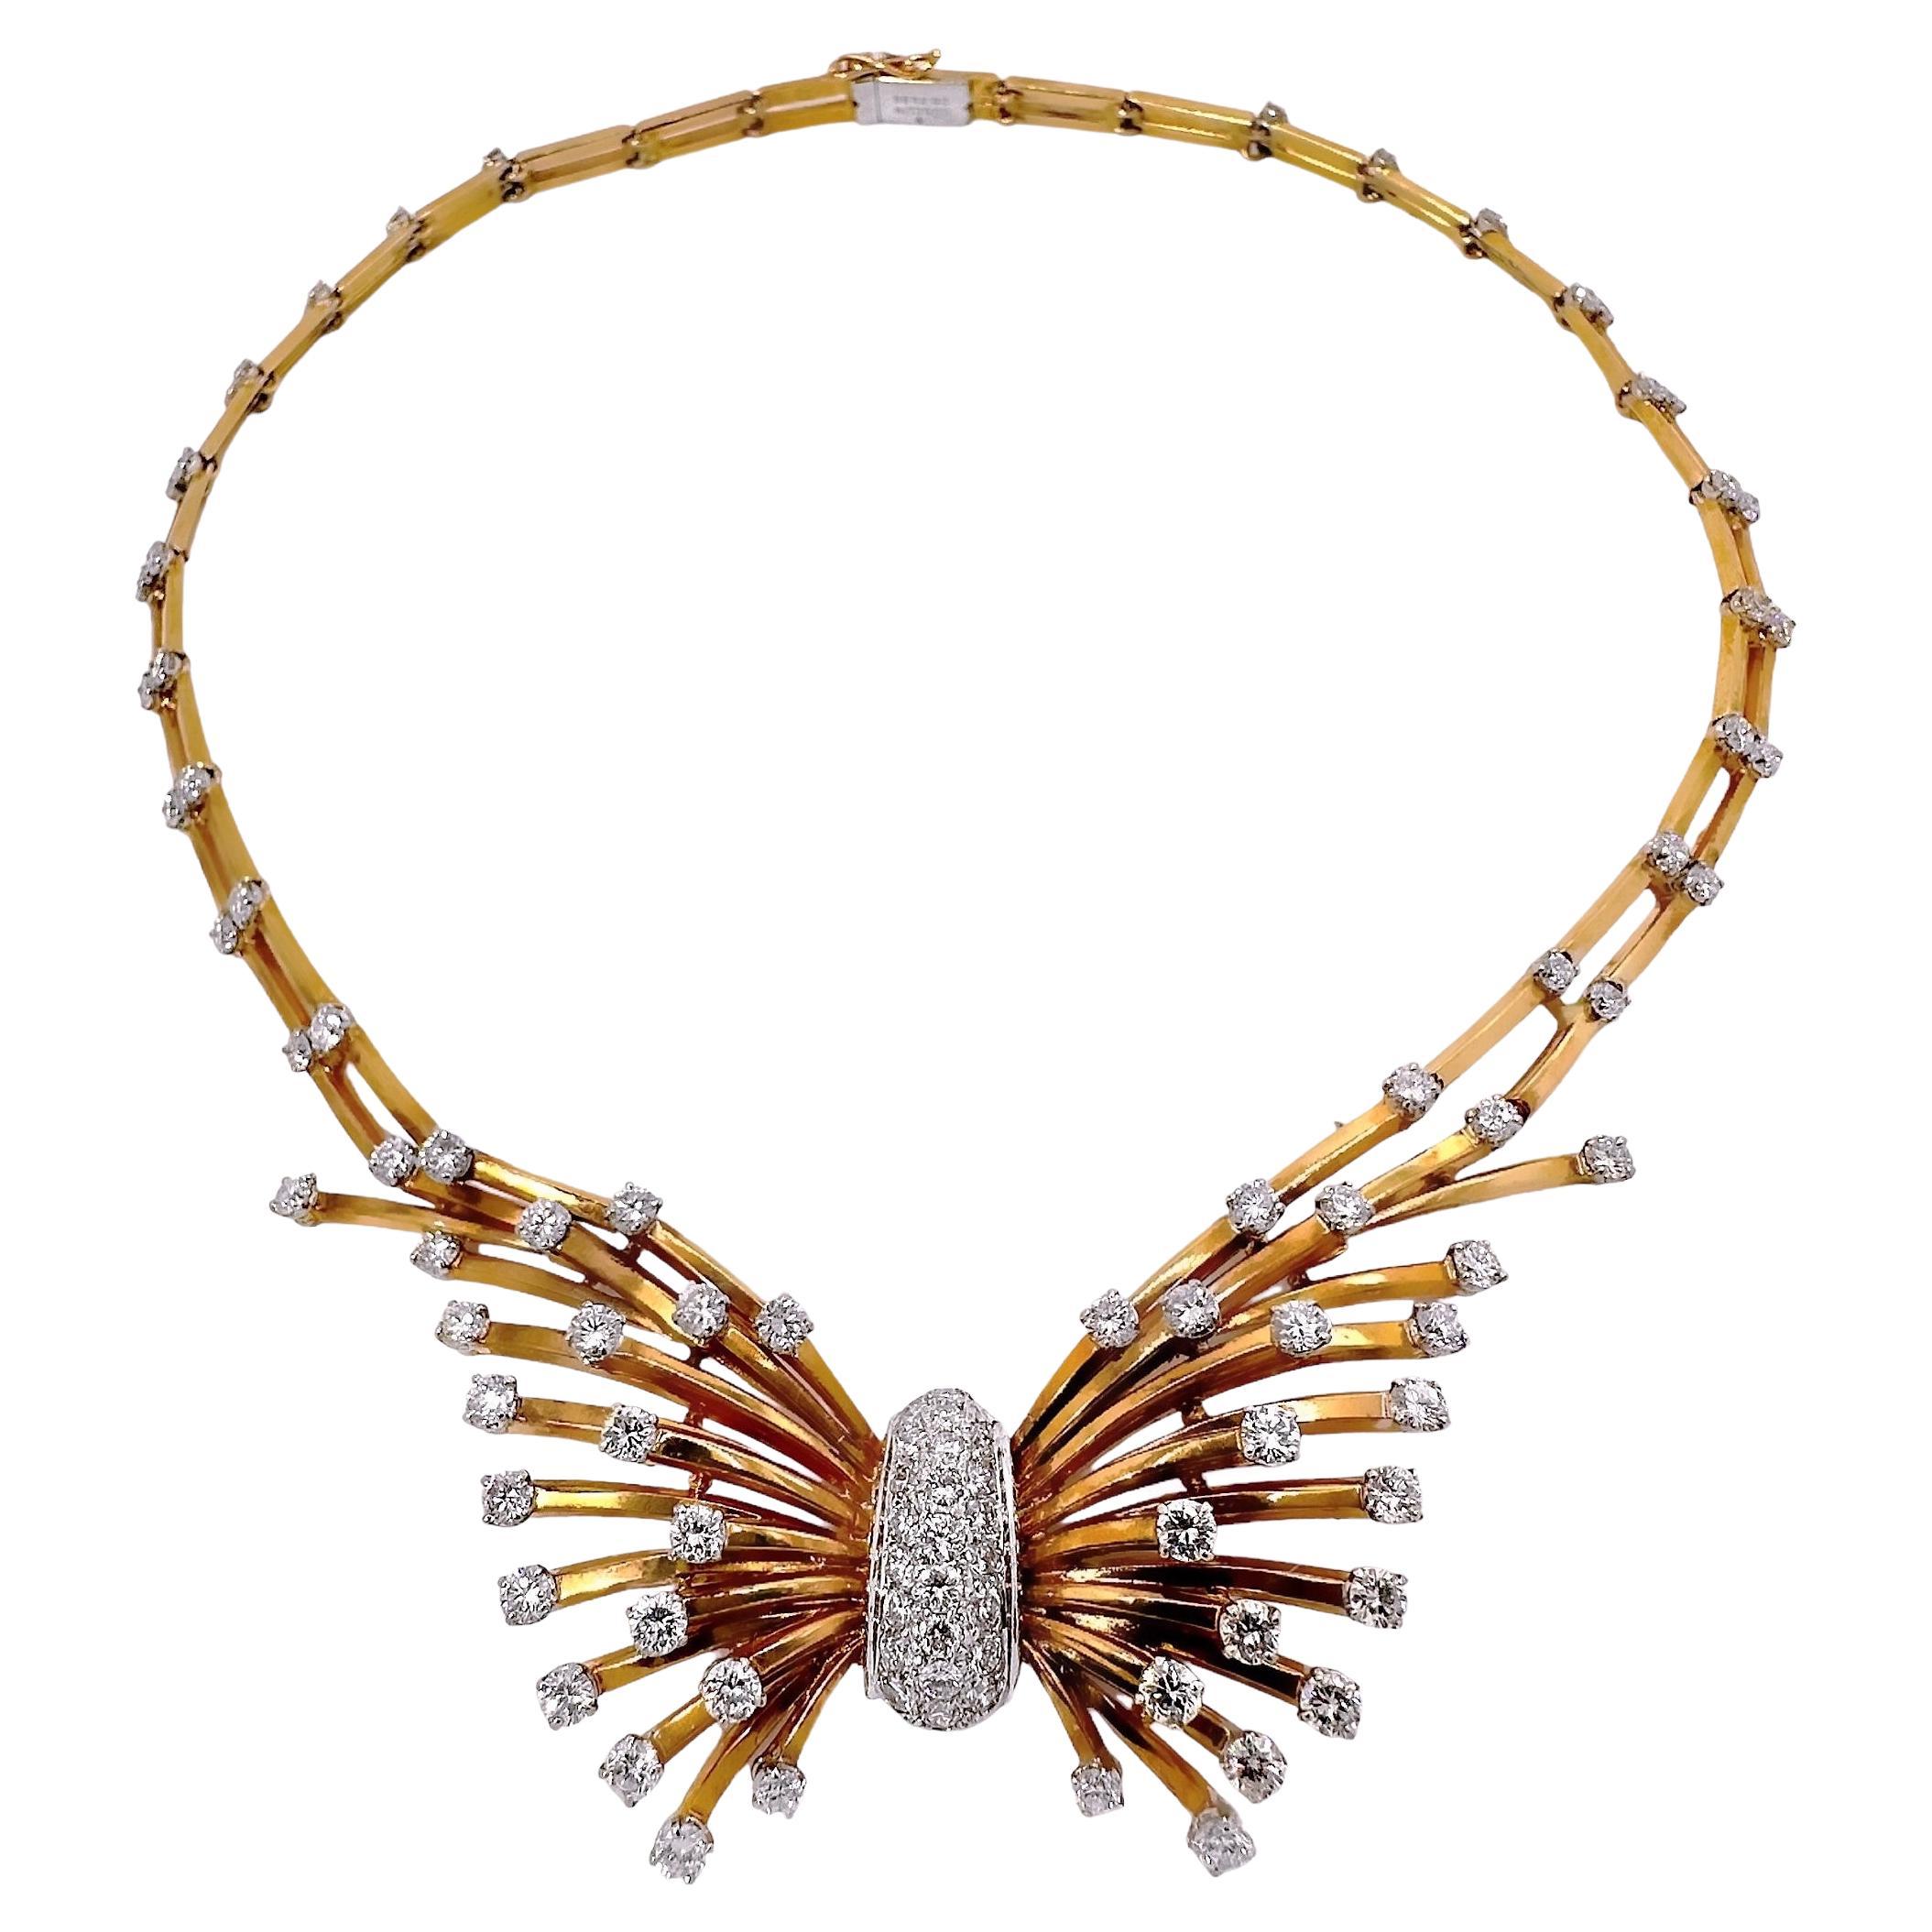 Created by Gubelin in Switzerland at some time during the 1940's, this incredible necklace bespeaks elegance and quiet opulence. It is a piece of jewelry that absolutely needs to be seen in hand, to understand the incredible level of attention to